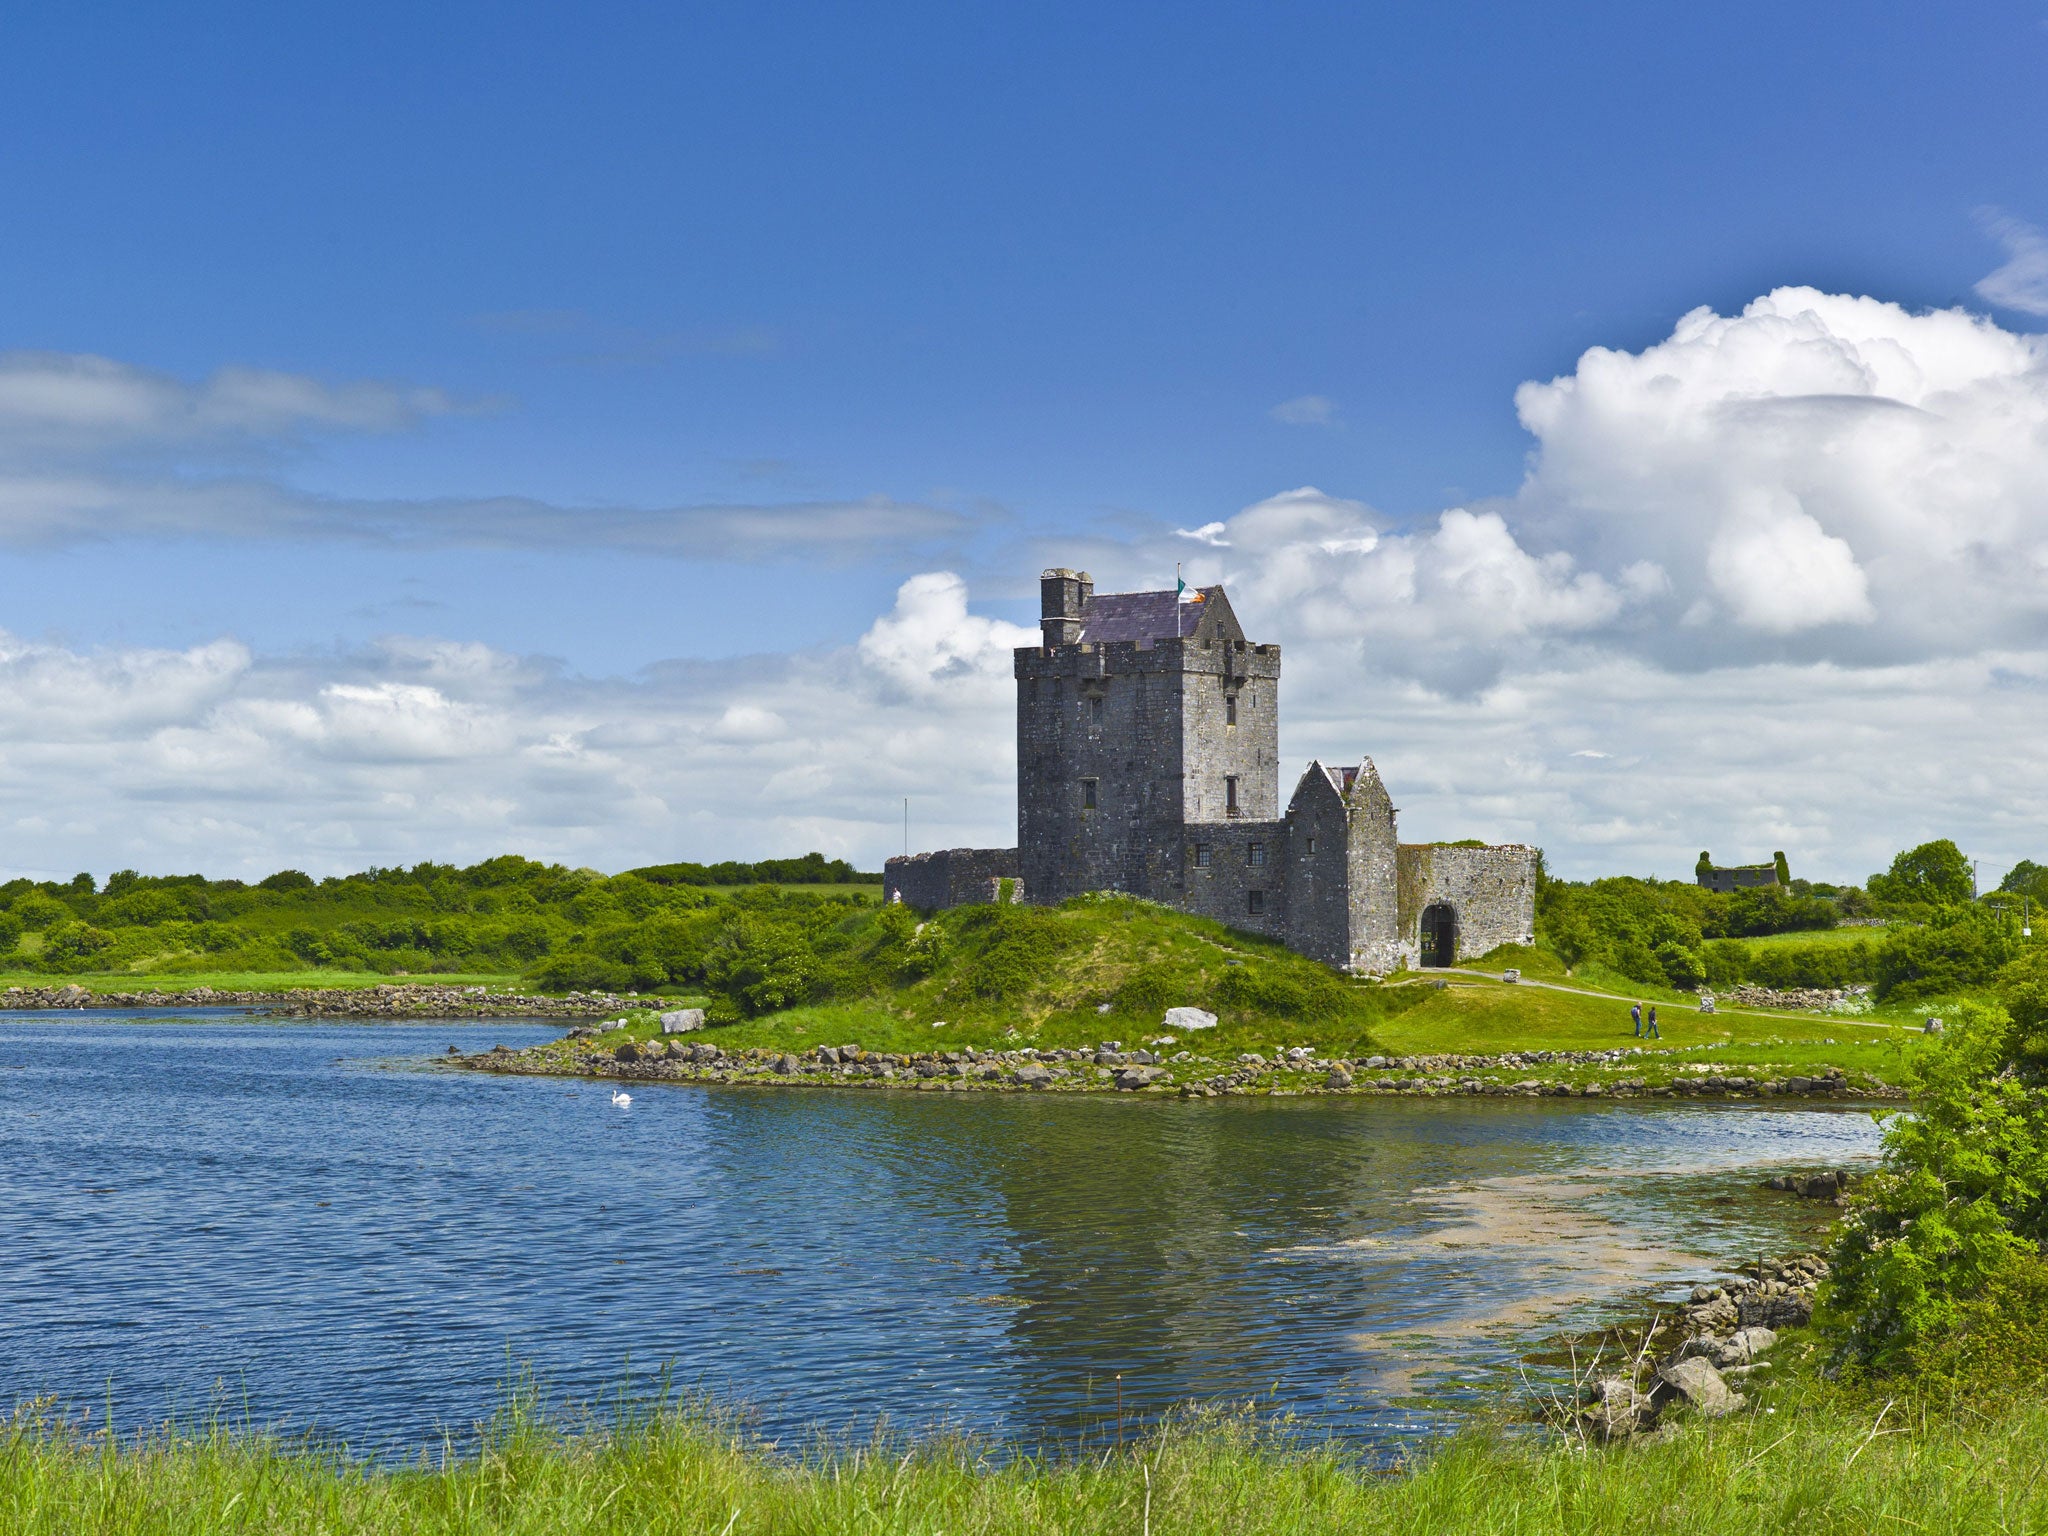 Story teller: the beauty of Galway, Ireland